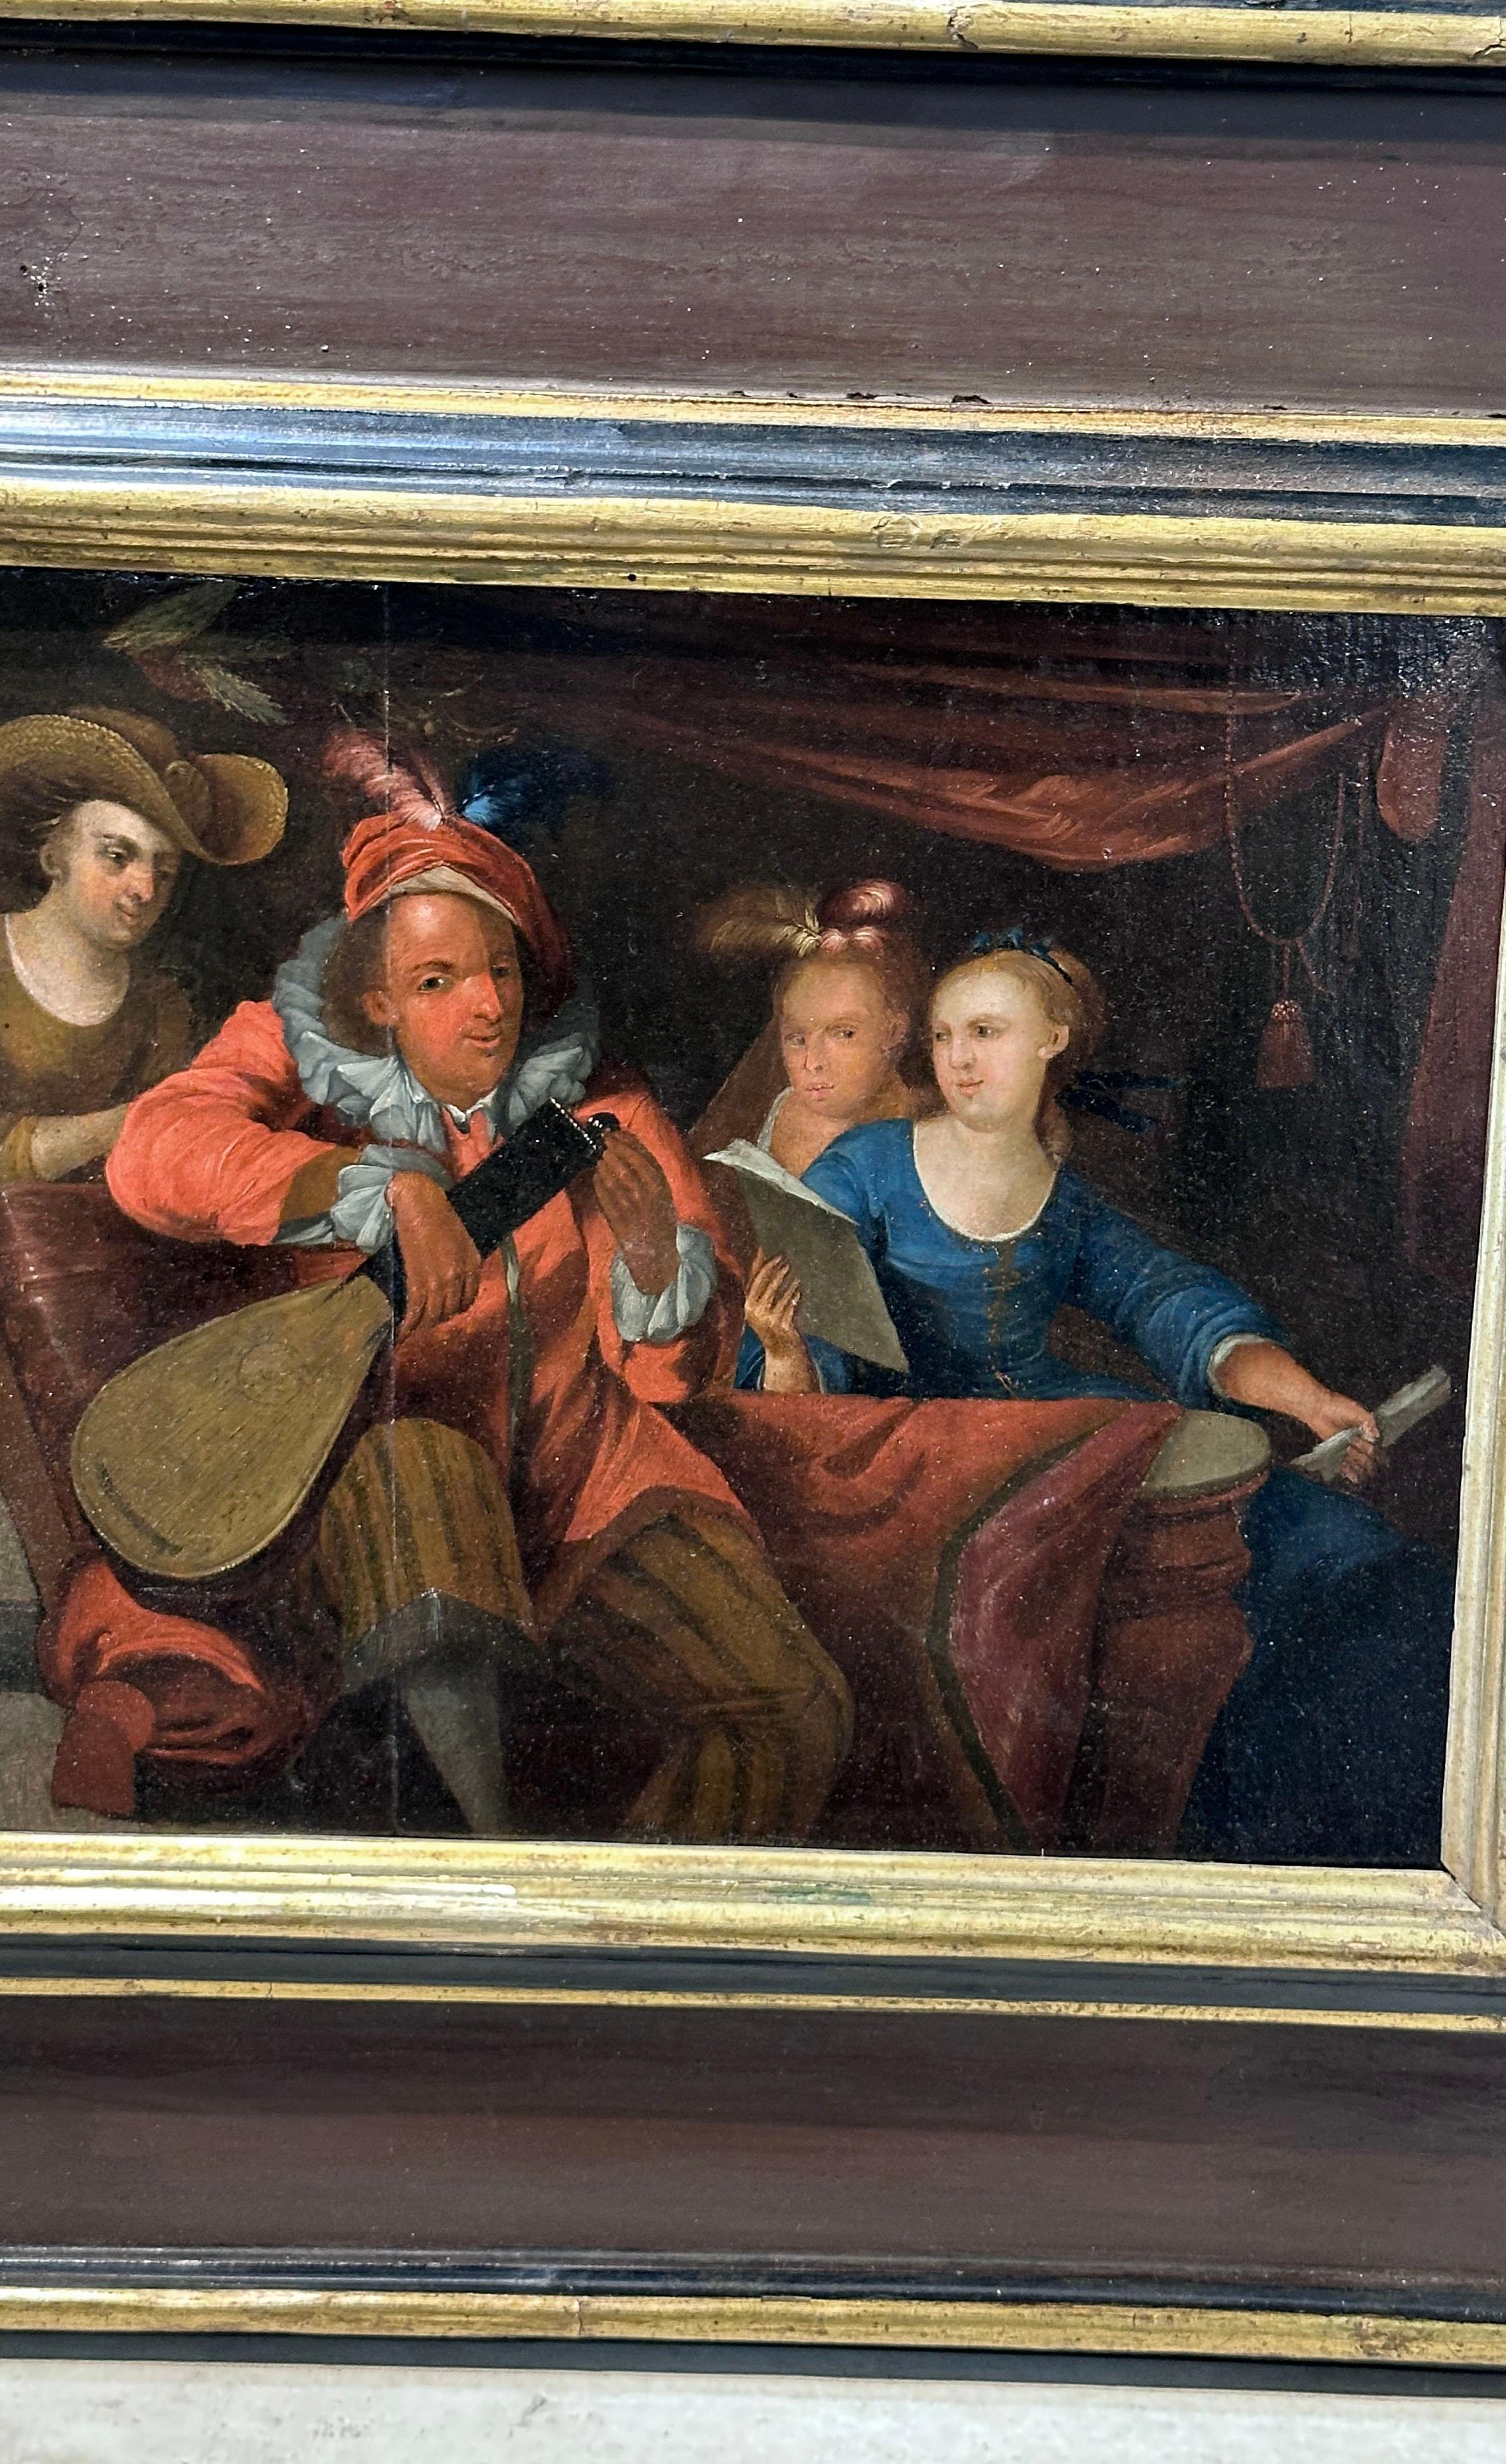 Oiled 17th CENTURY PAINTING WITH PARTY AND CONCERT IN A PALACE For Sale